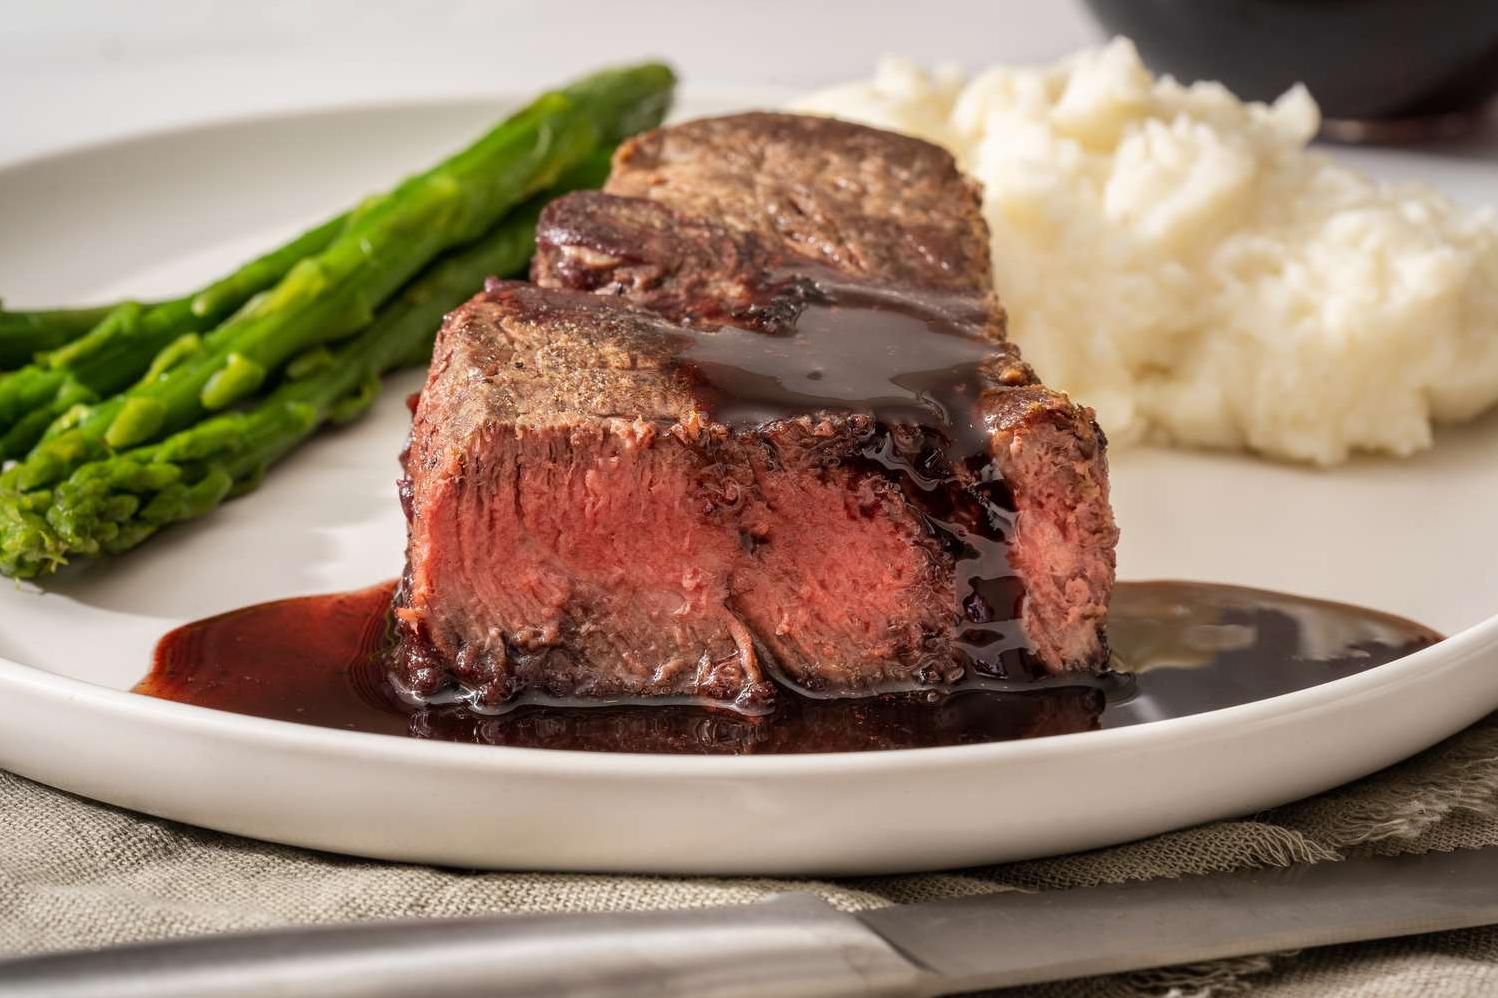  A glass of red wine is a perfect pairing for a juicy steak smothered in wine sauce.